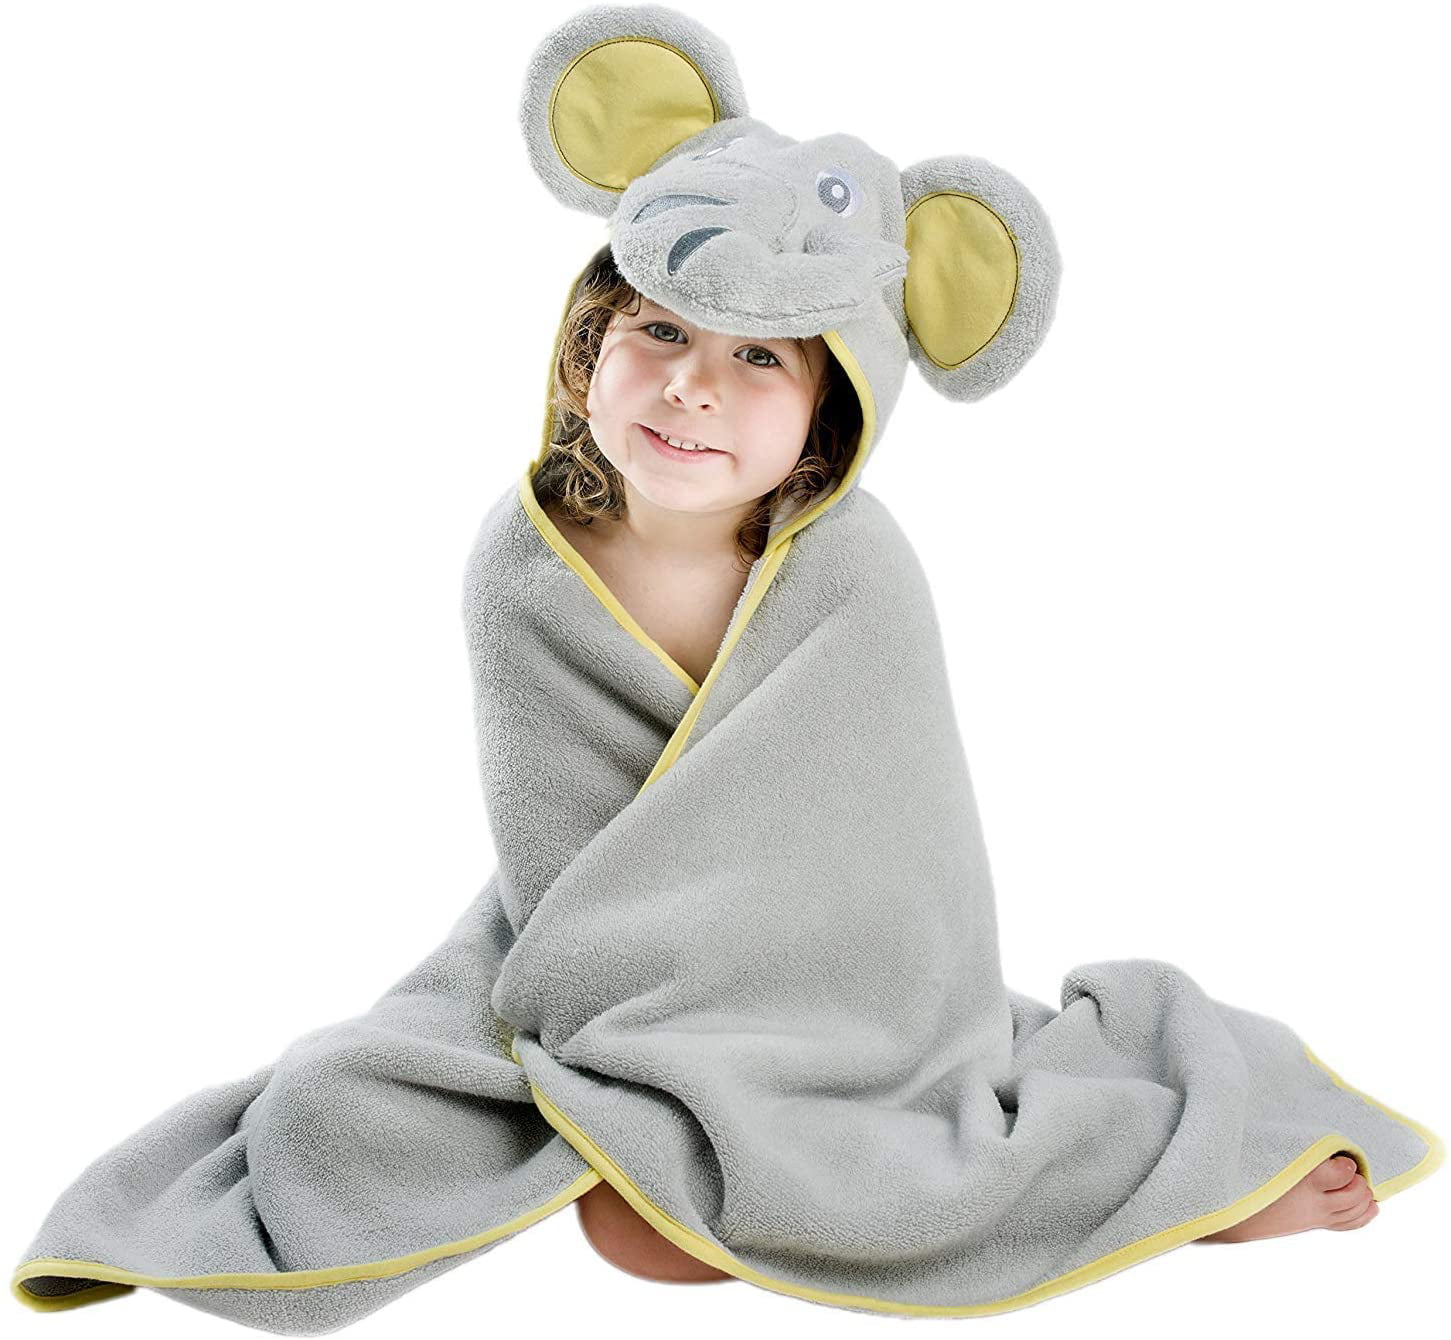 Cover-up Towel Toddler NovForth Kids Beach Towel Poncho Children Hooded Bath Towel 